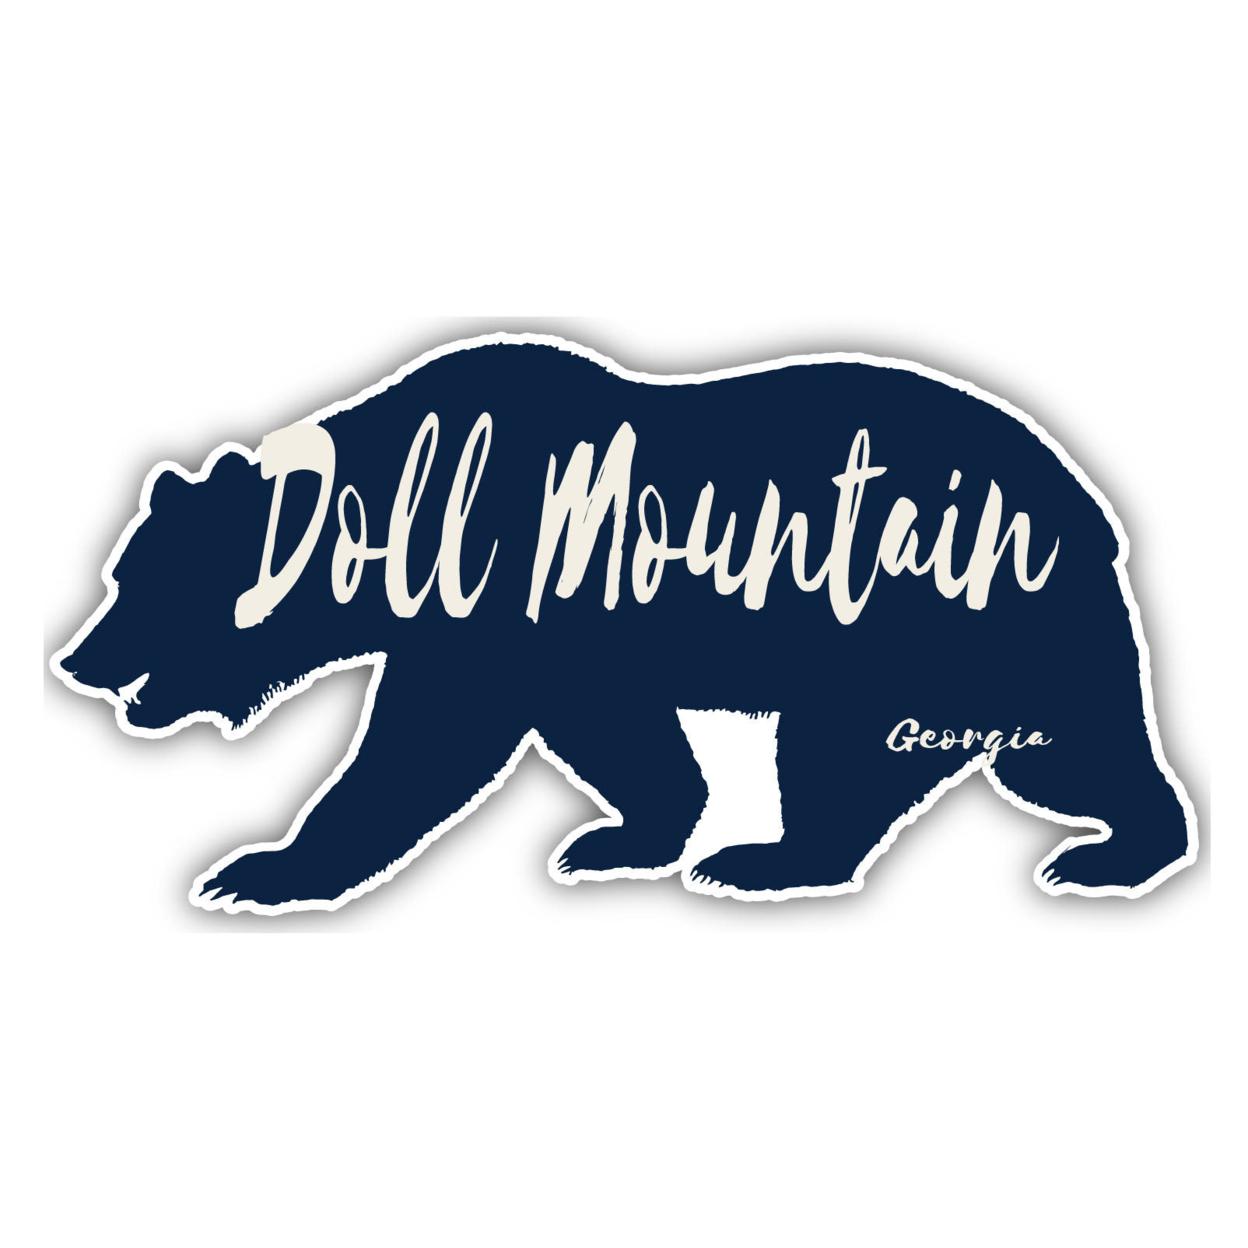 Doll Mountain Georgia Souvenir Decorative Stickers (Choose Theme And Size) - 4-Pack, 10-Inch, Great Outdoors